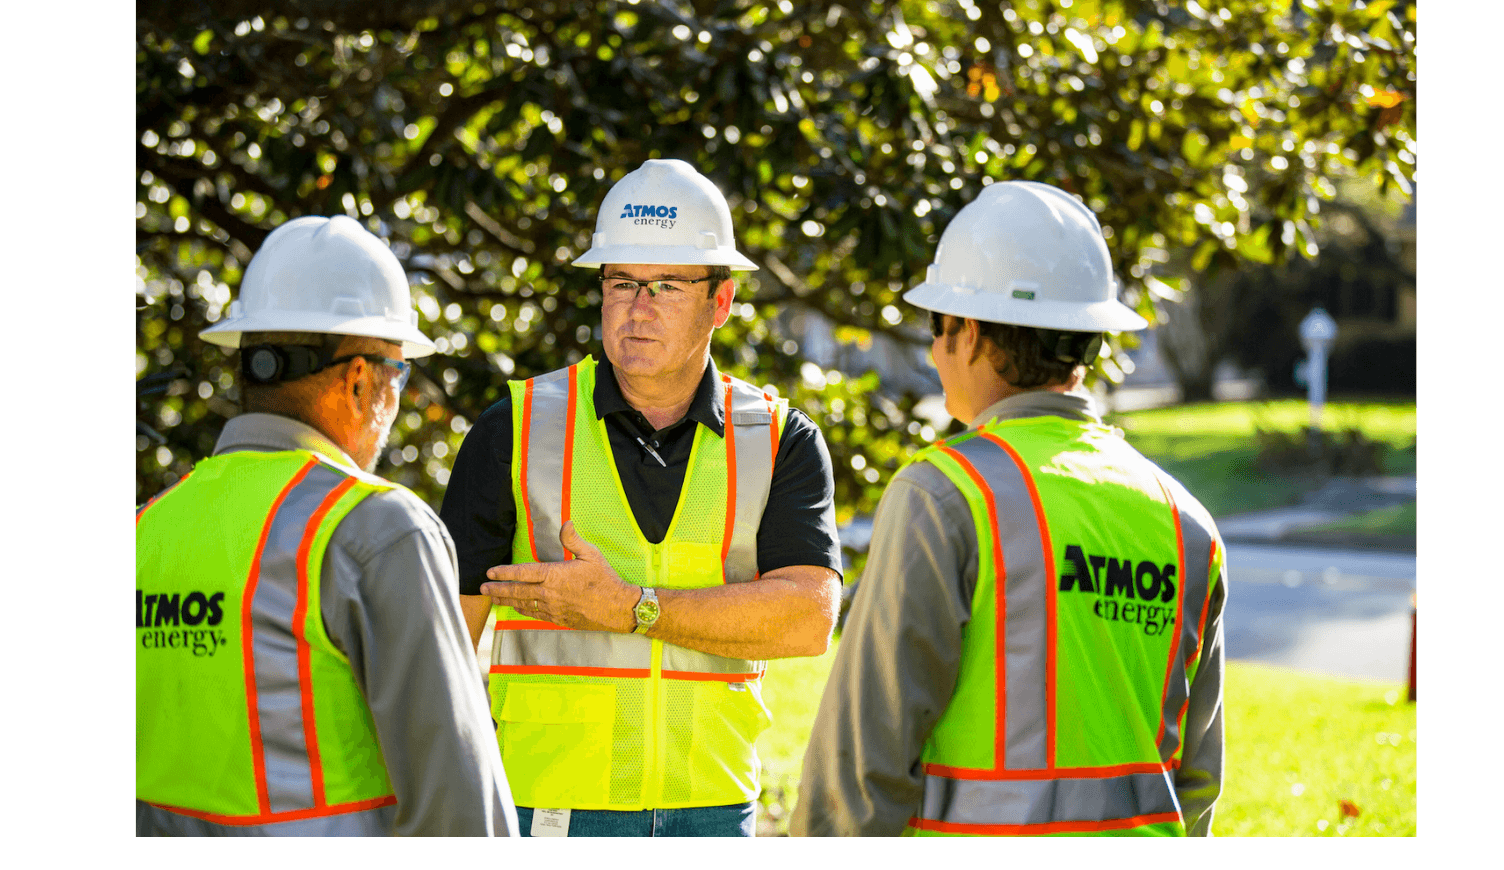 atmos-energy-employee-and-contractors